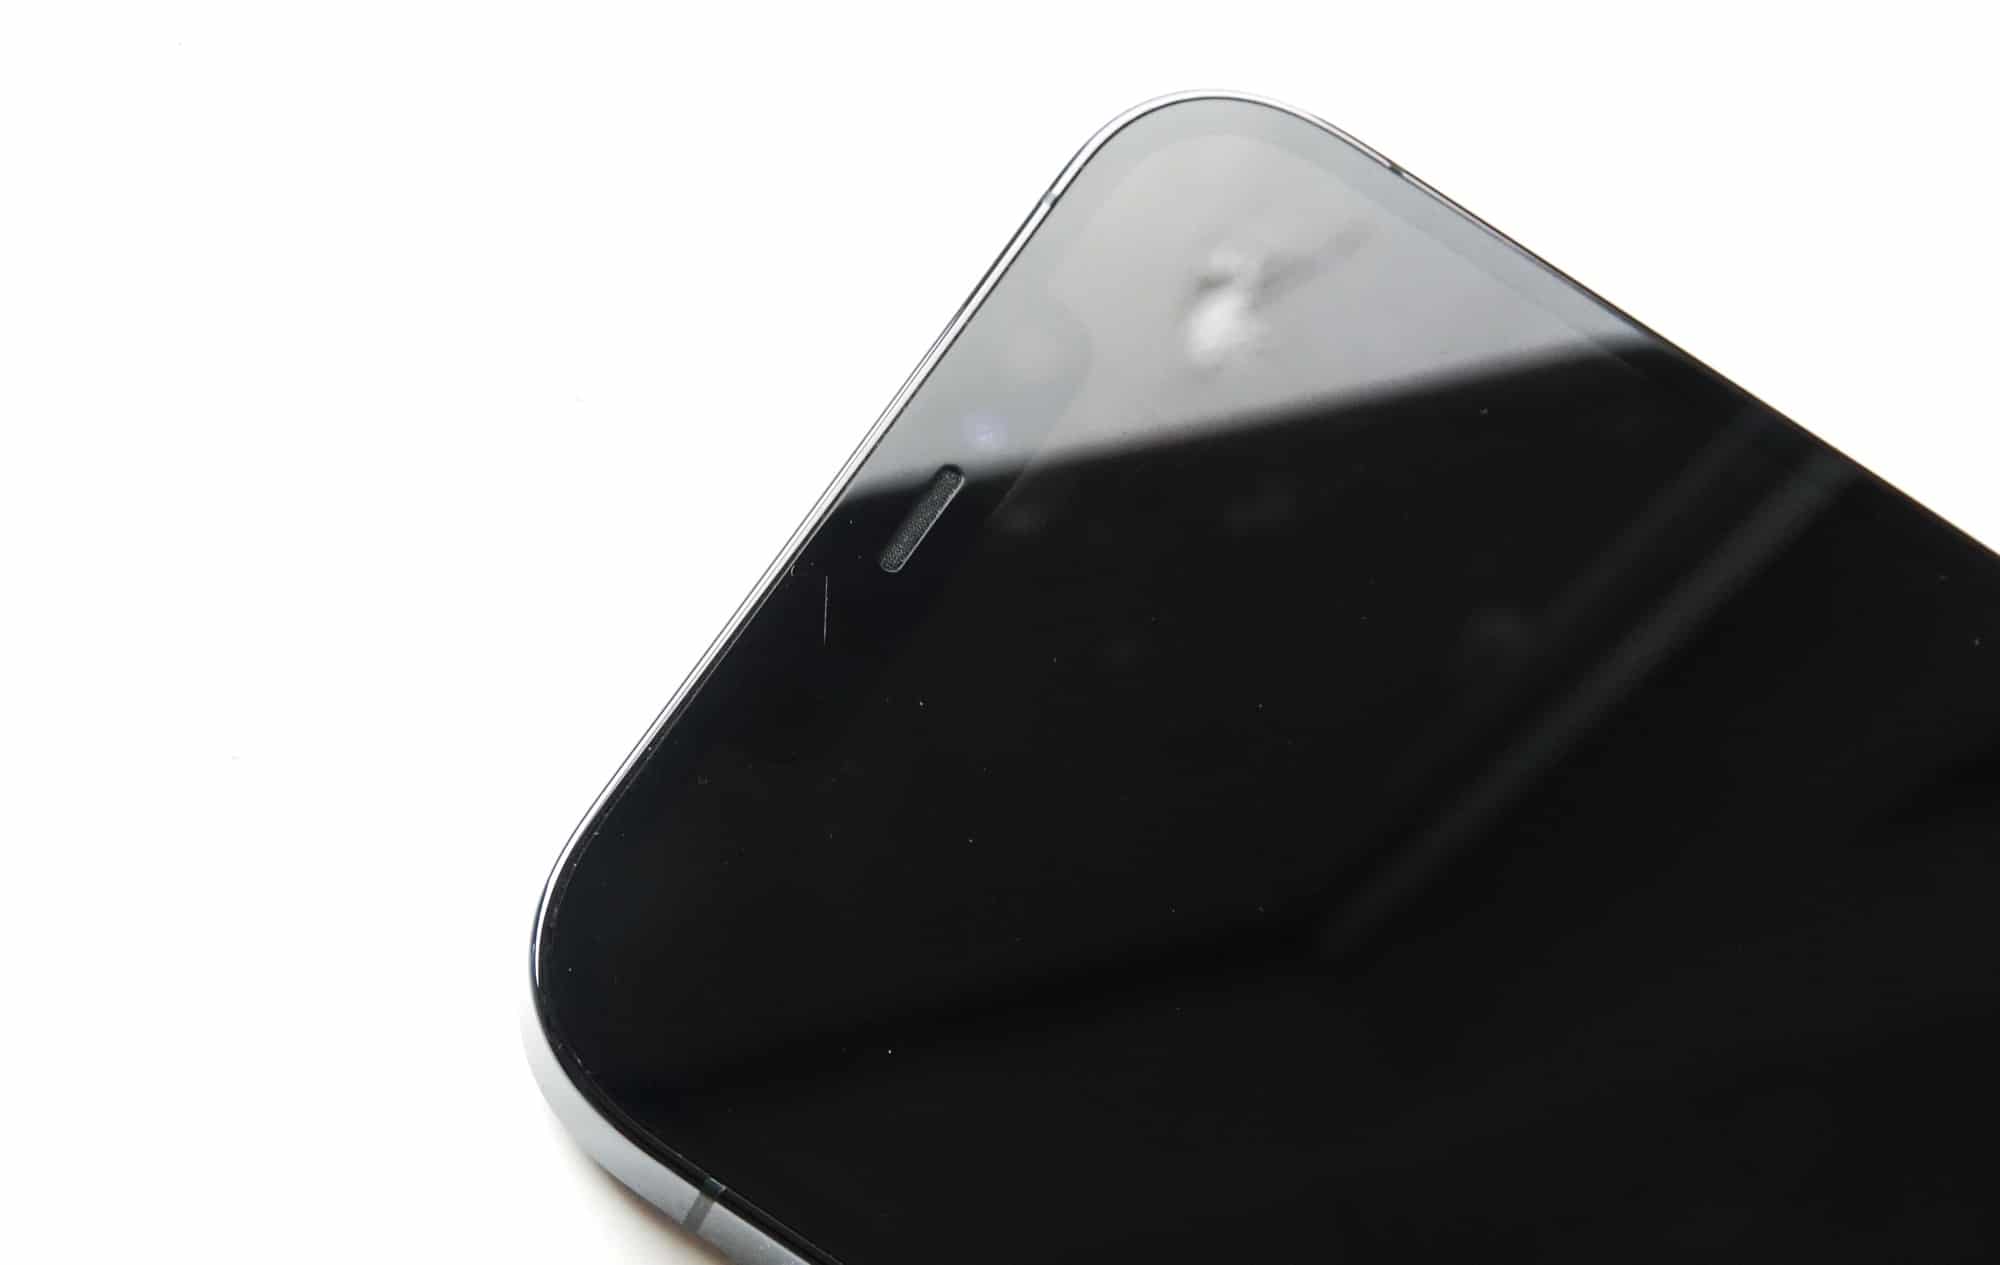 The front of the iPhone 12 Pro Max shares a scratch or two, regardless of what Ceramic Shield is designed to do.